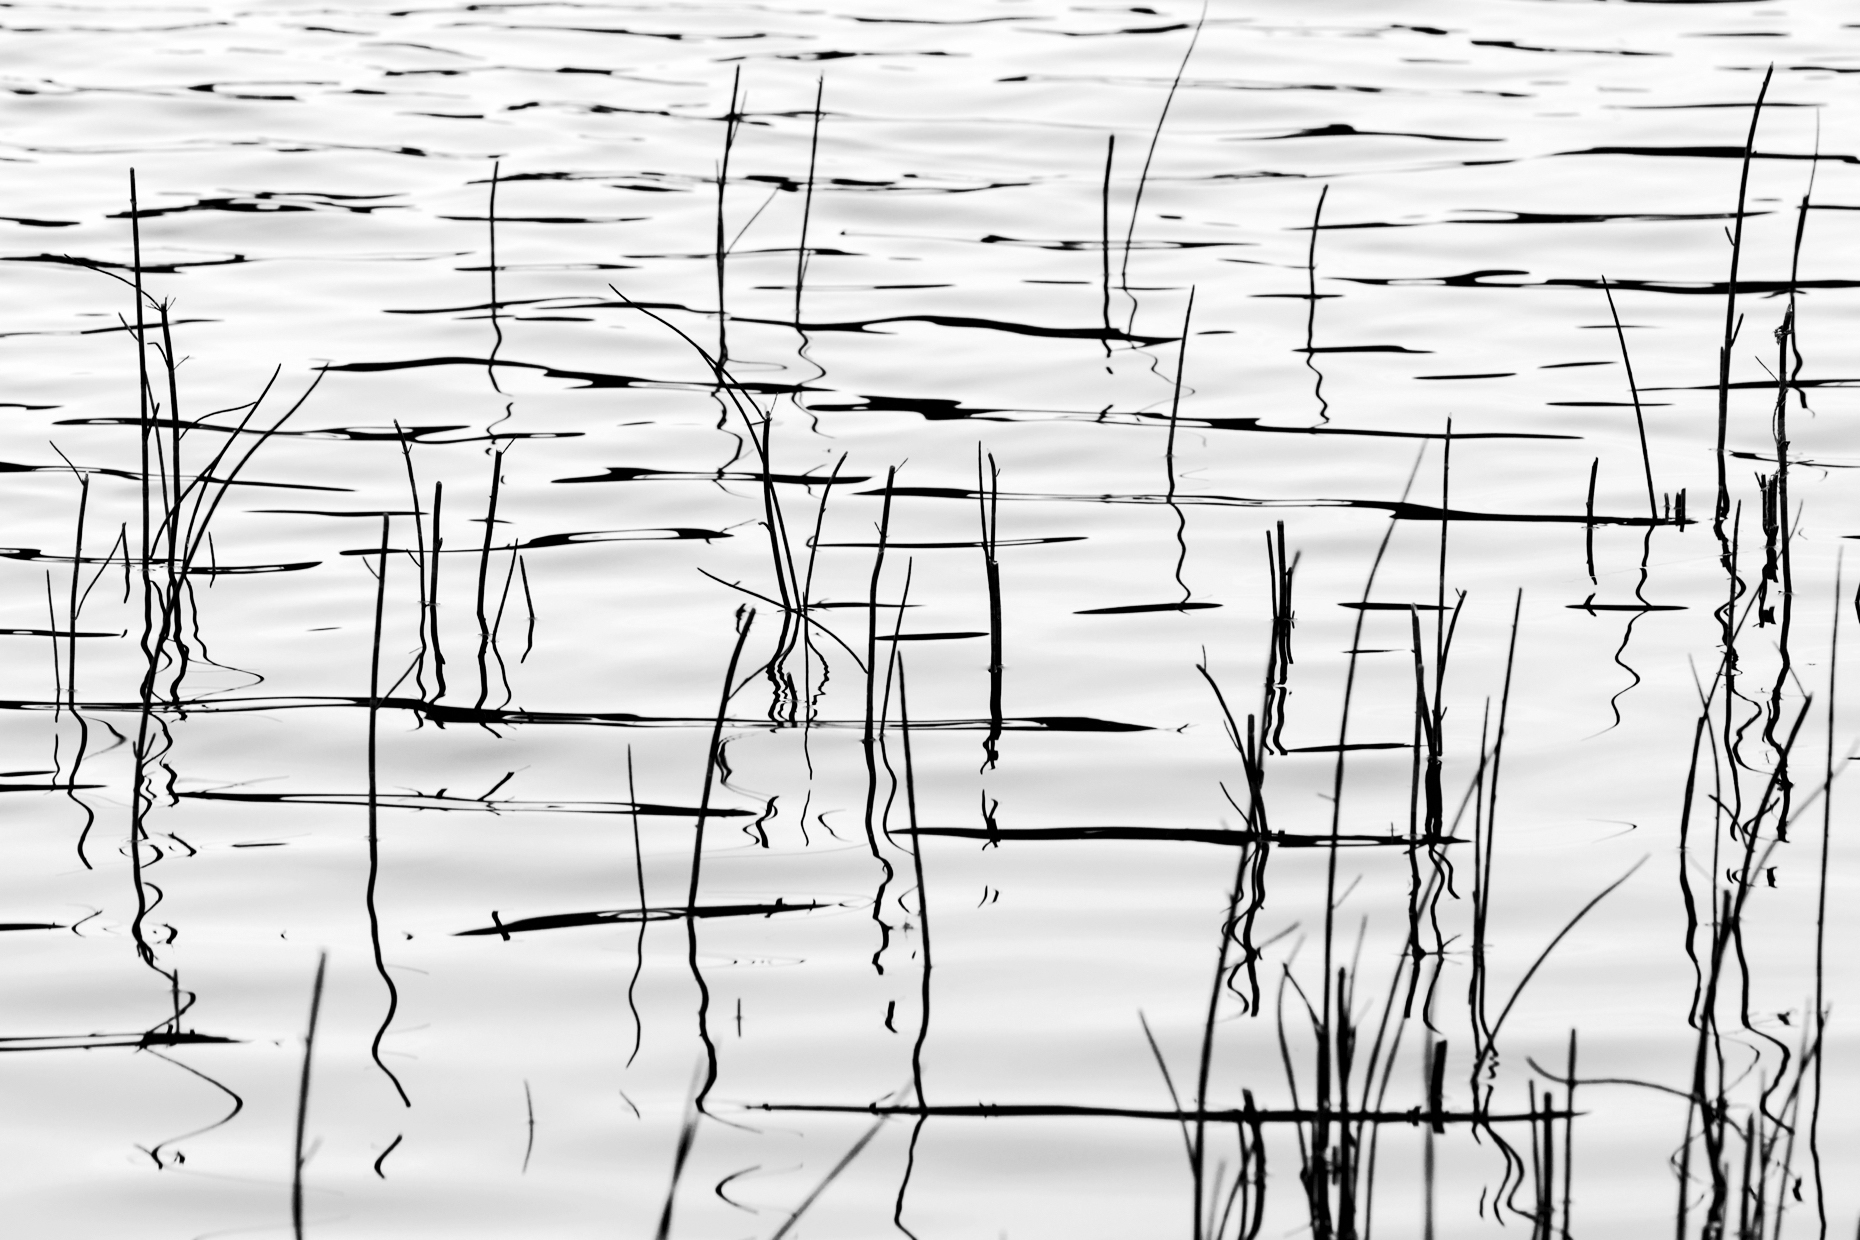 Black and white image of marsh grass and reflections in a tundra lake in the western section of Denali National Park, Alaska, USA